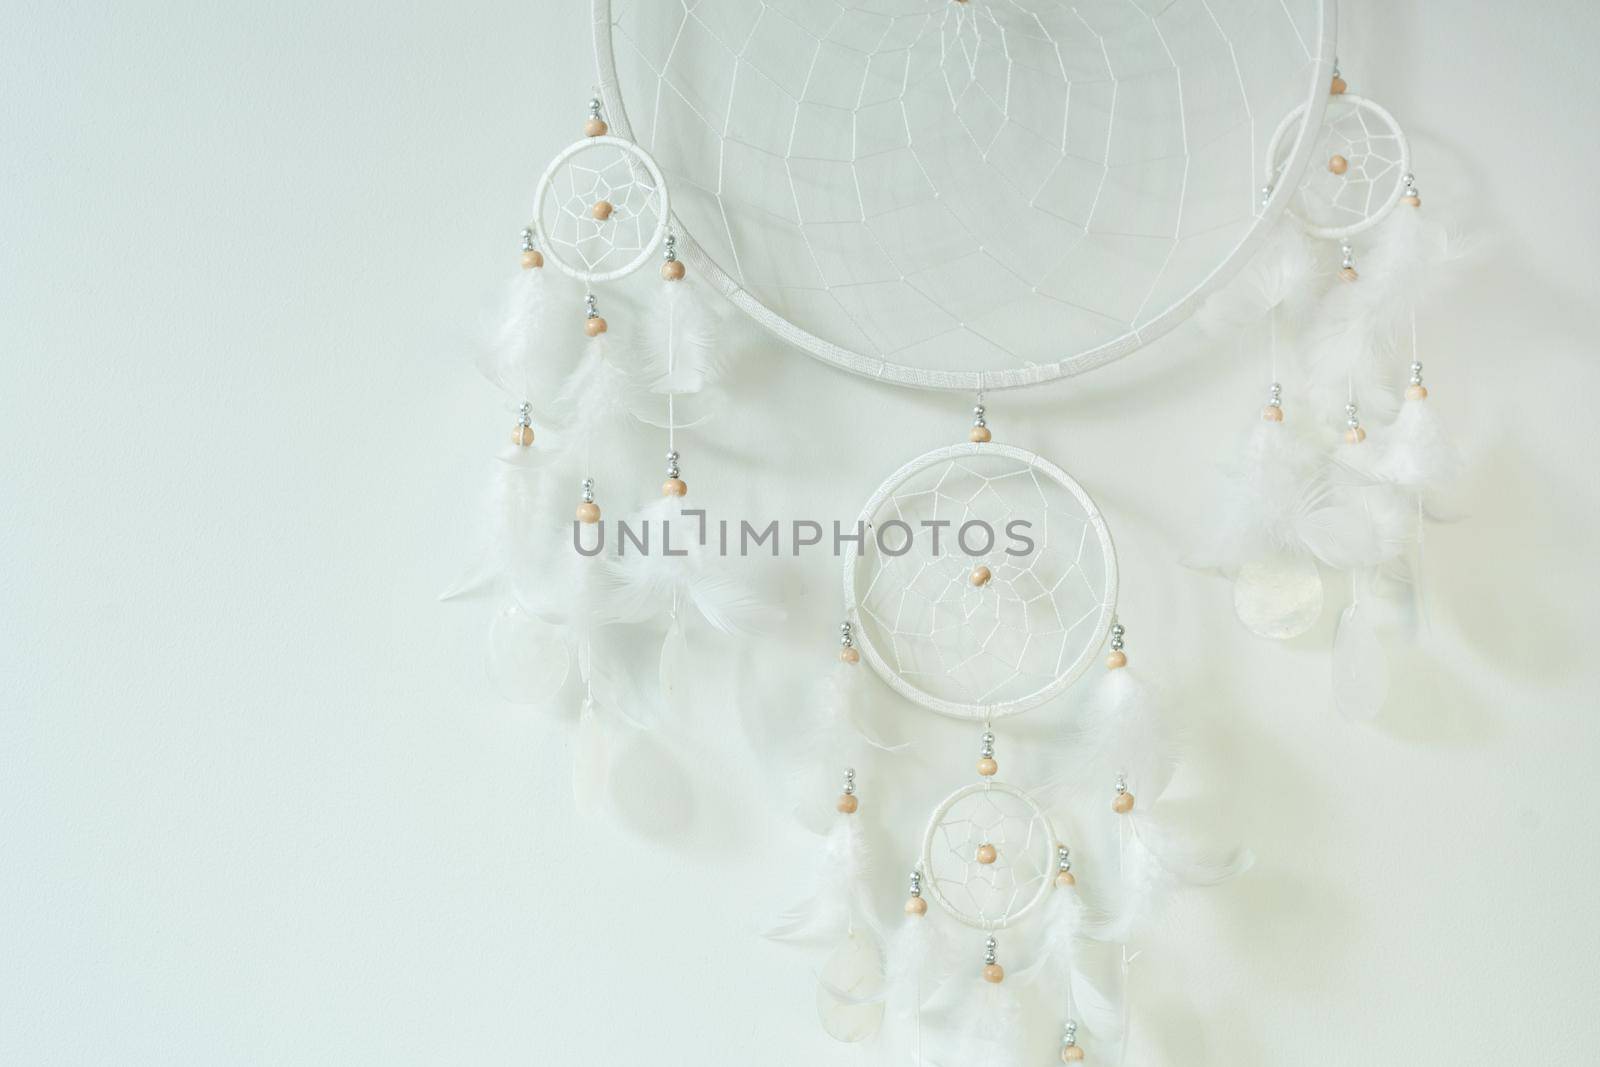 White dreamcatcher hanging on white wall background. handmade willow hoop woven net decorated with feathers. protective charm for infants